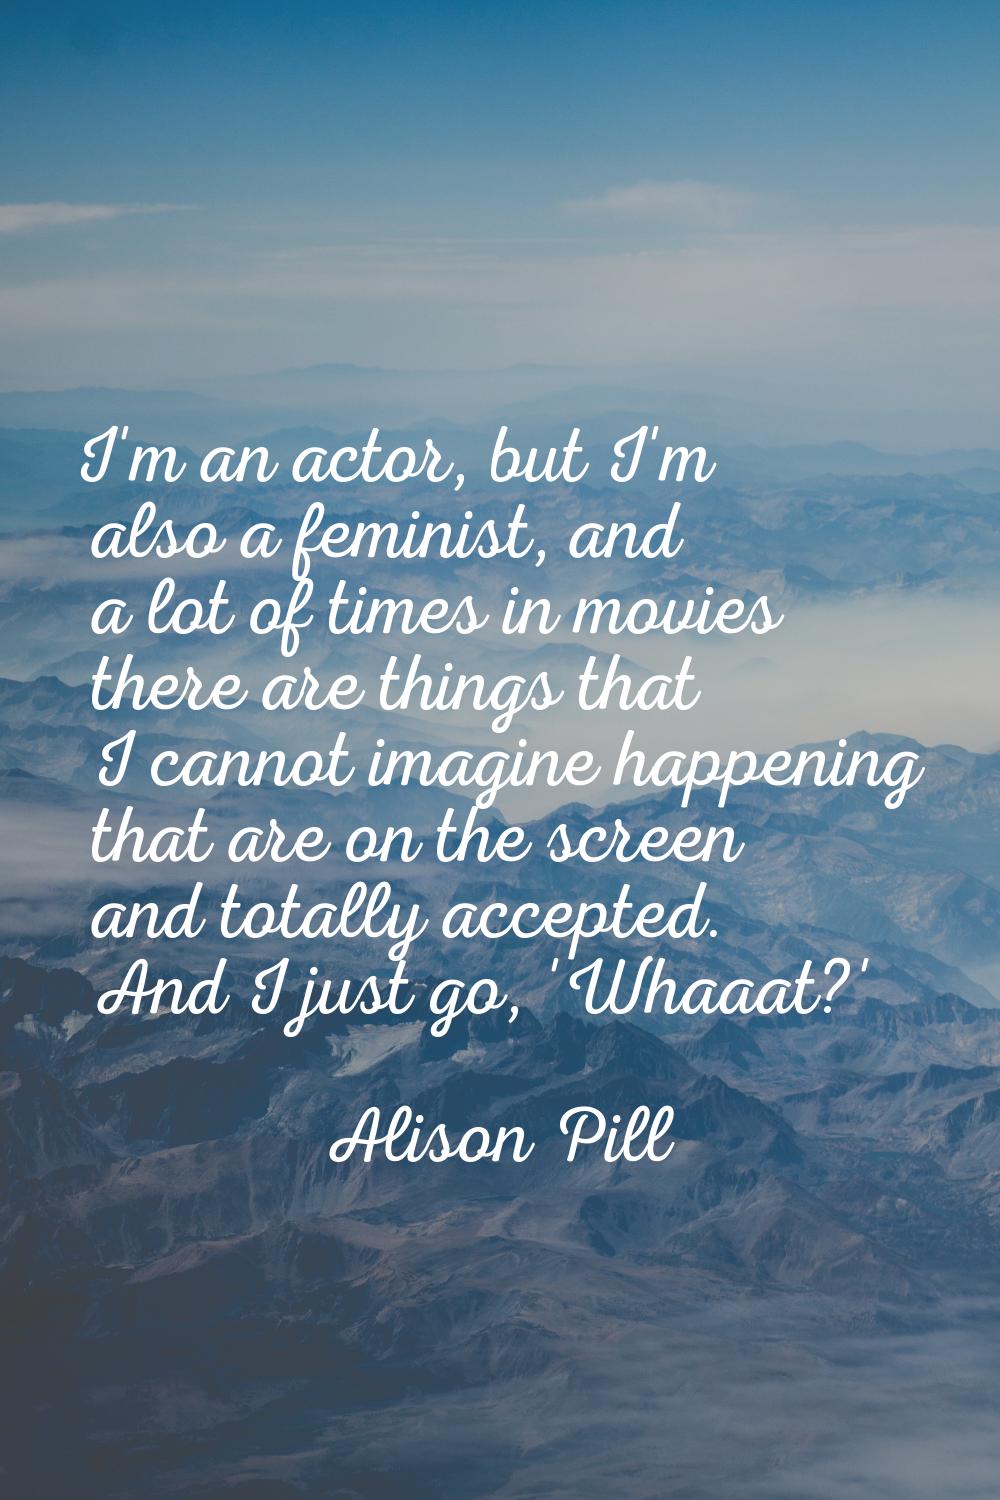 I'm an actor, but I'm also a feminist, and a lot of times in movies there are things that I cannot 